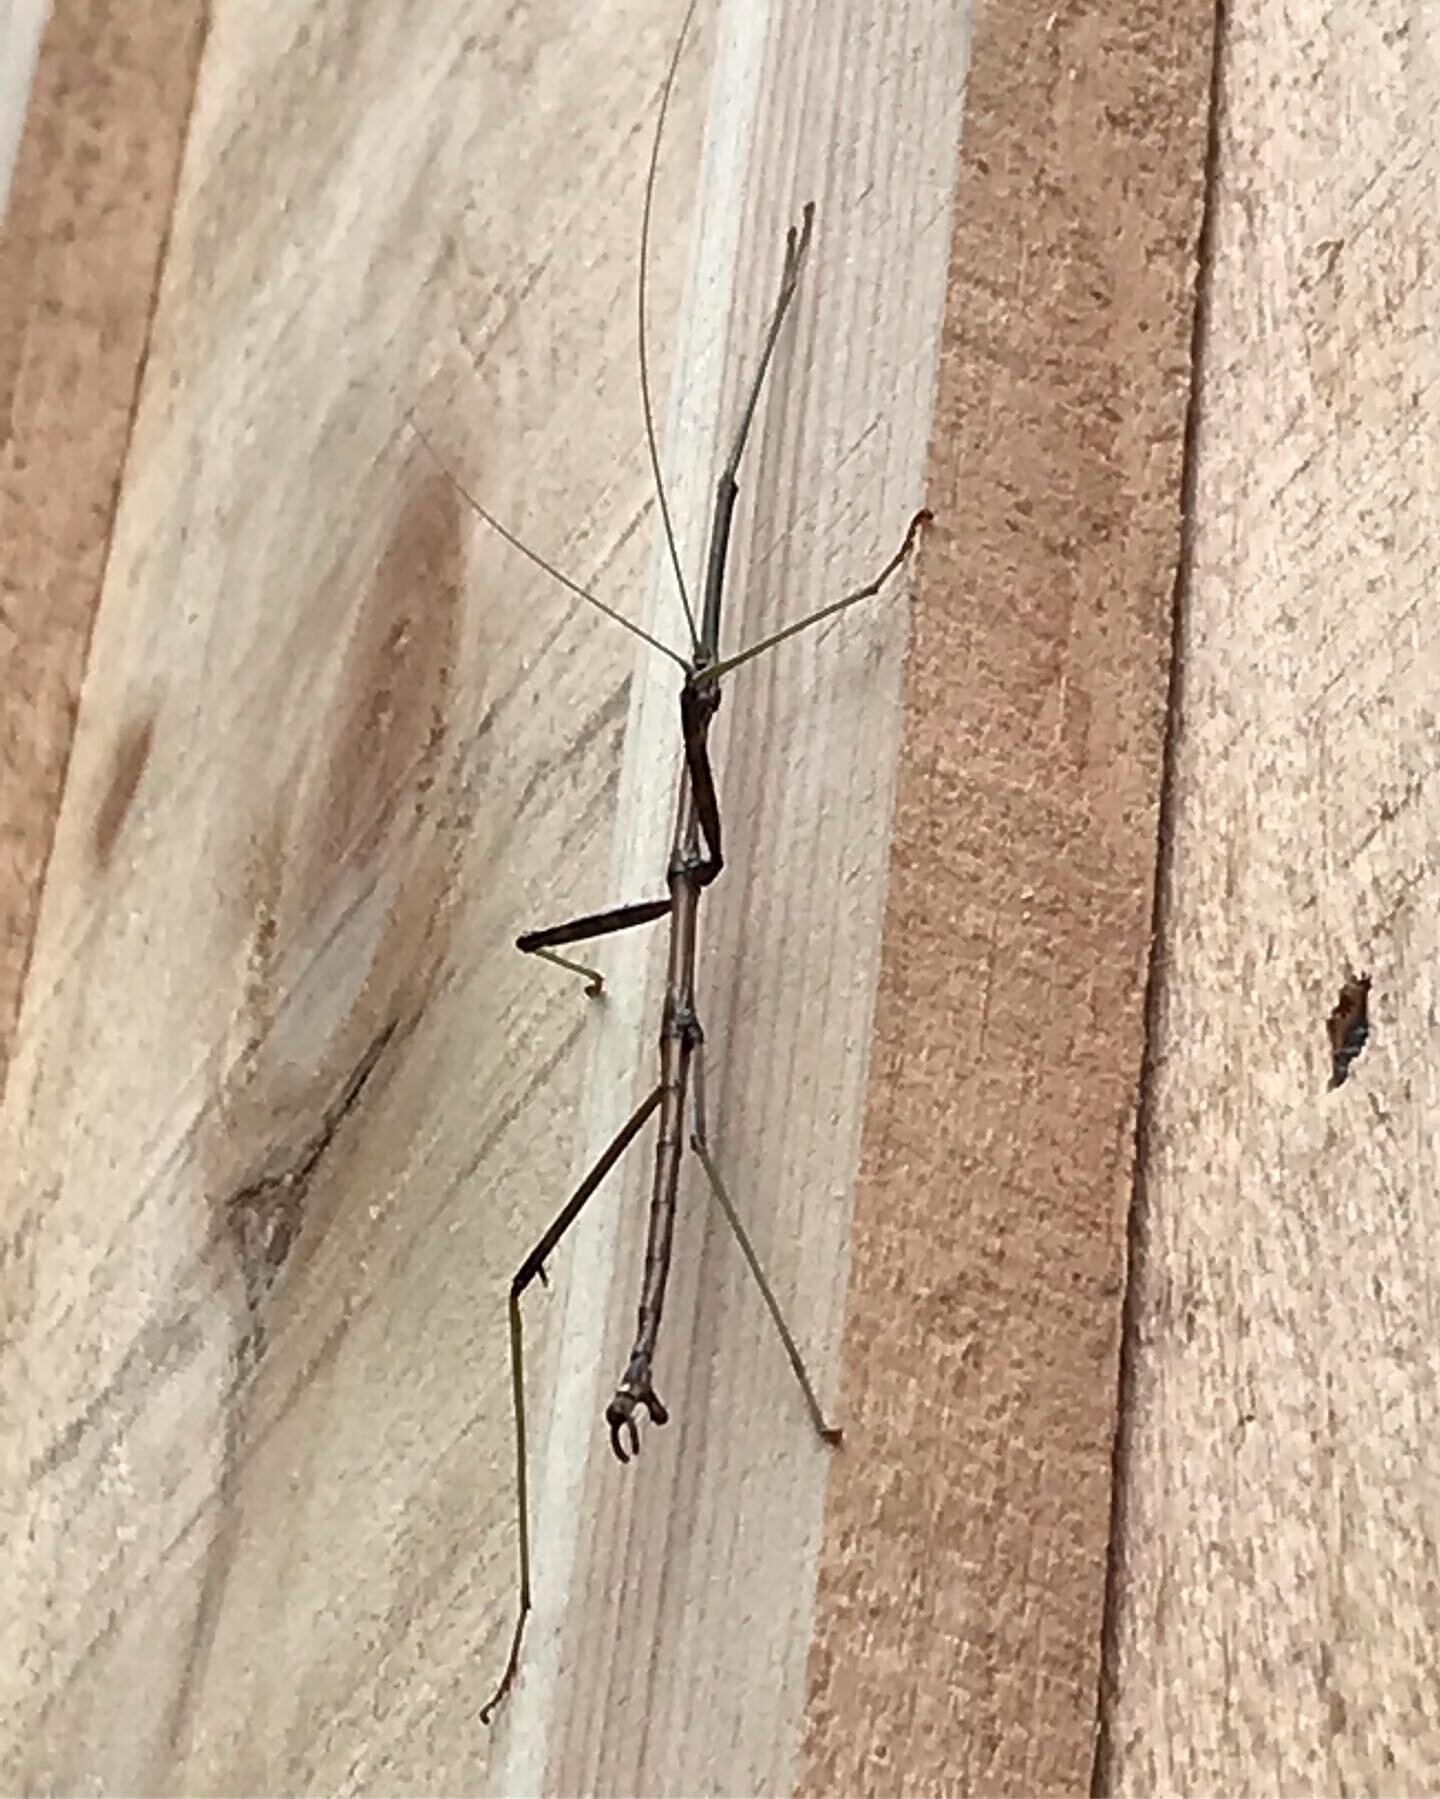 Now for something completely different, these little guys can be hard to spot! #stickinsect #naturescool #insect #camouflage #northernwalkingstick